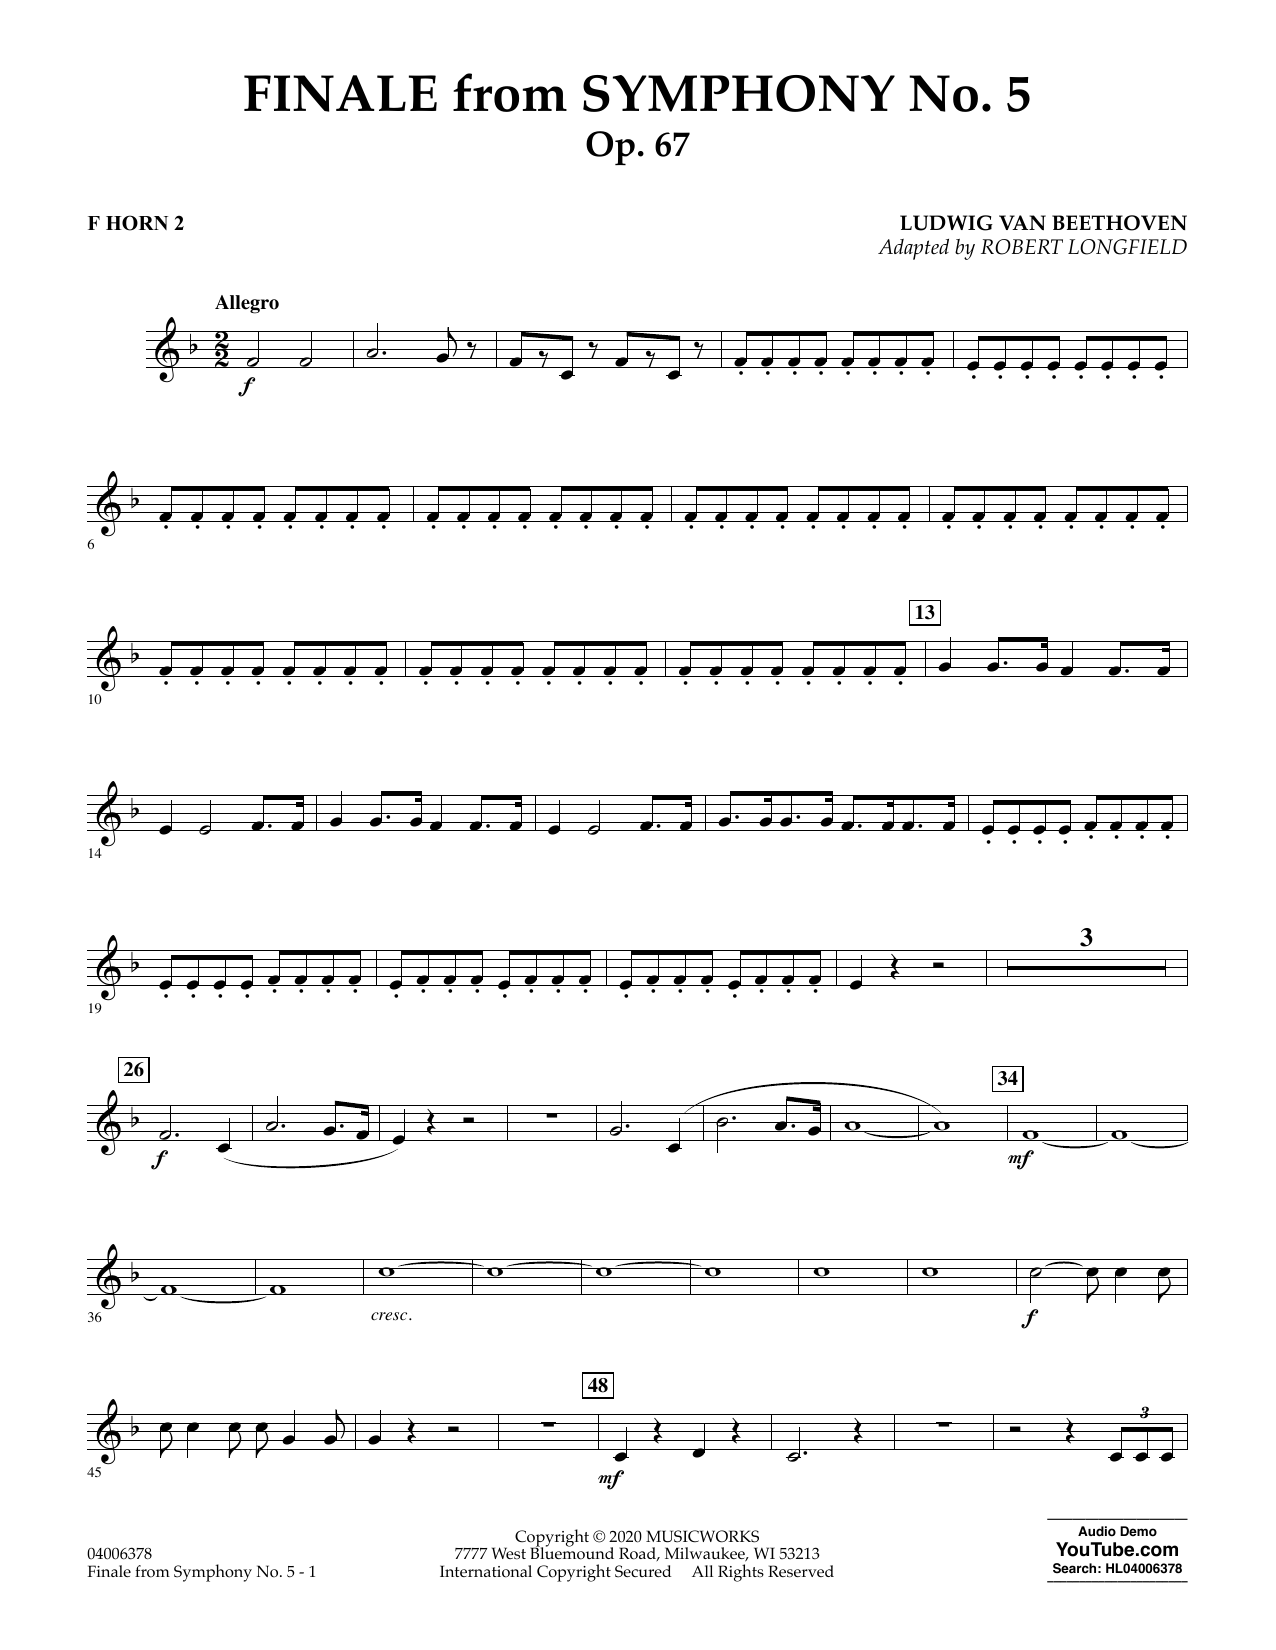 Ludwig van Beethoven Finale from Symphony No. 5 (arr. Robert Longfield) - F Horn 2 sheet music preview music notes and score for Concert Band including 3 page(s)